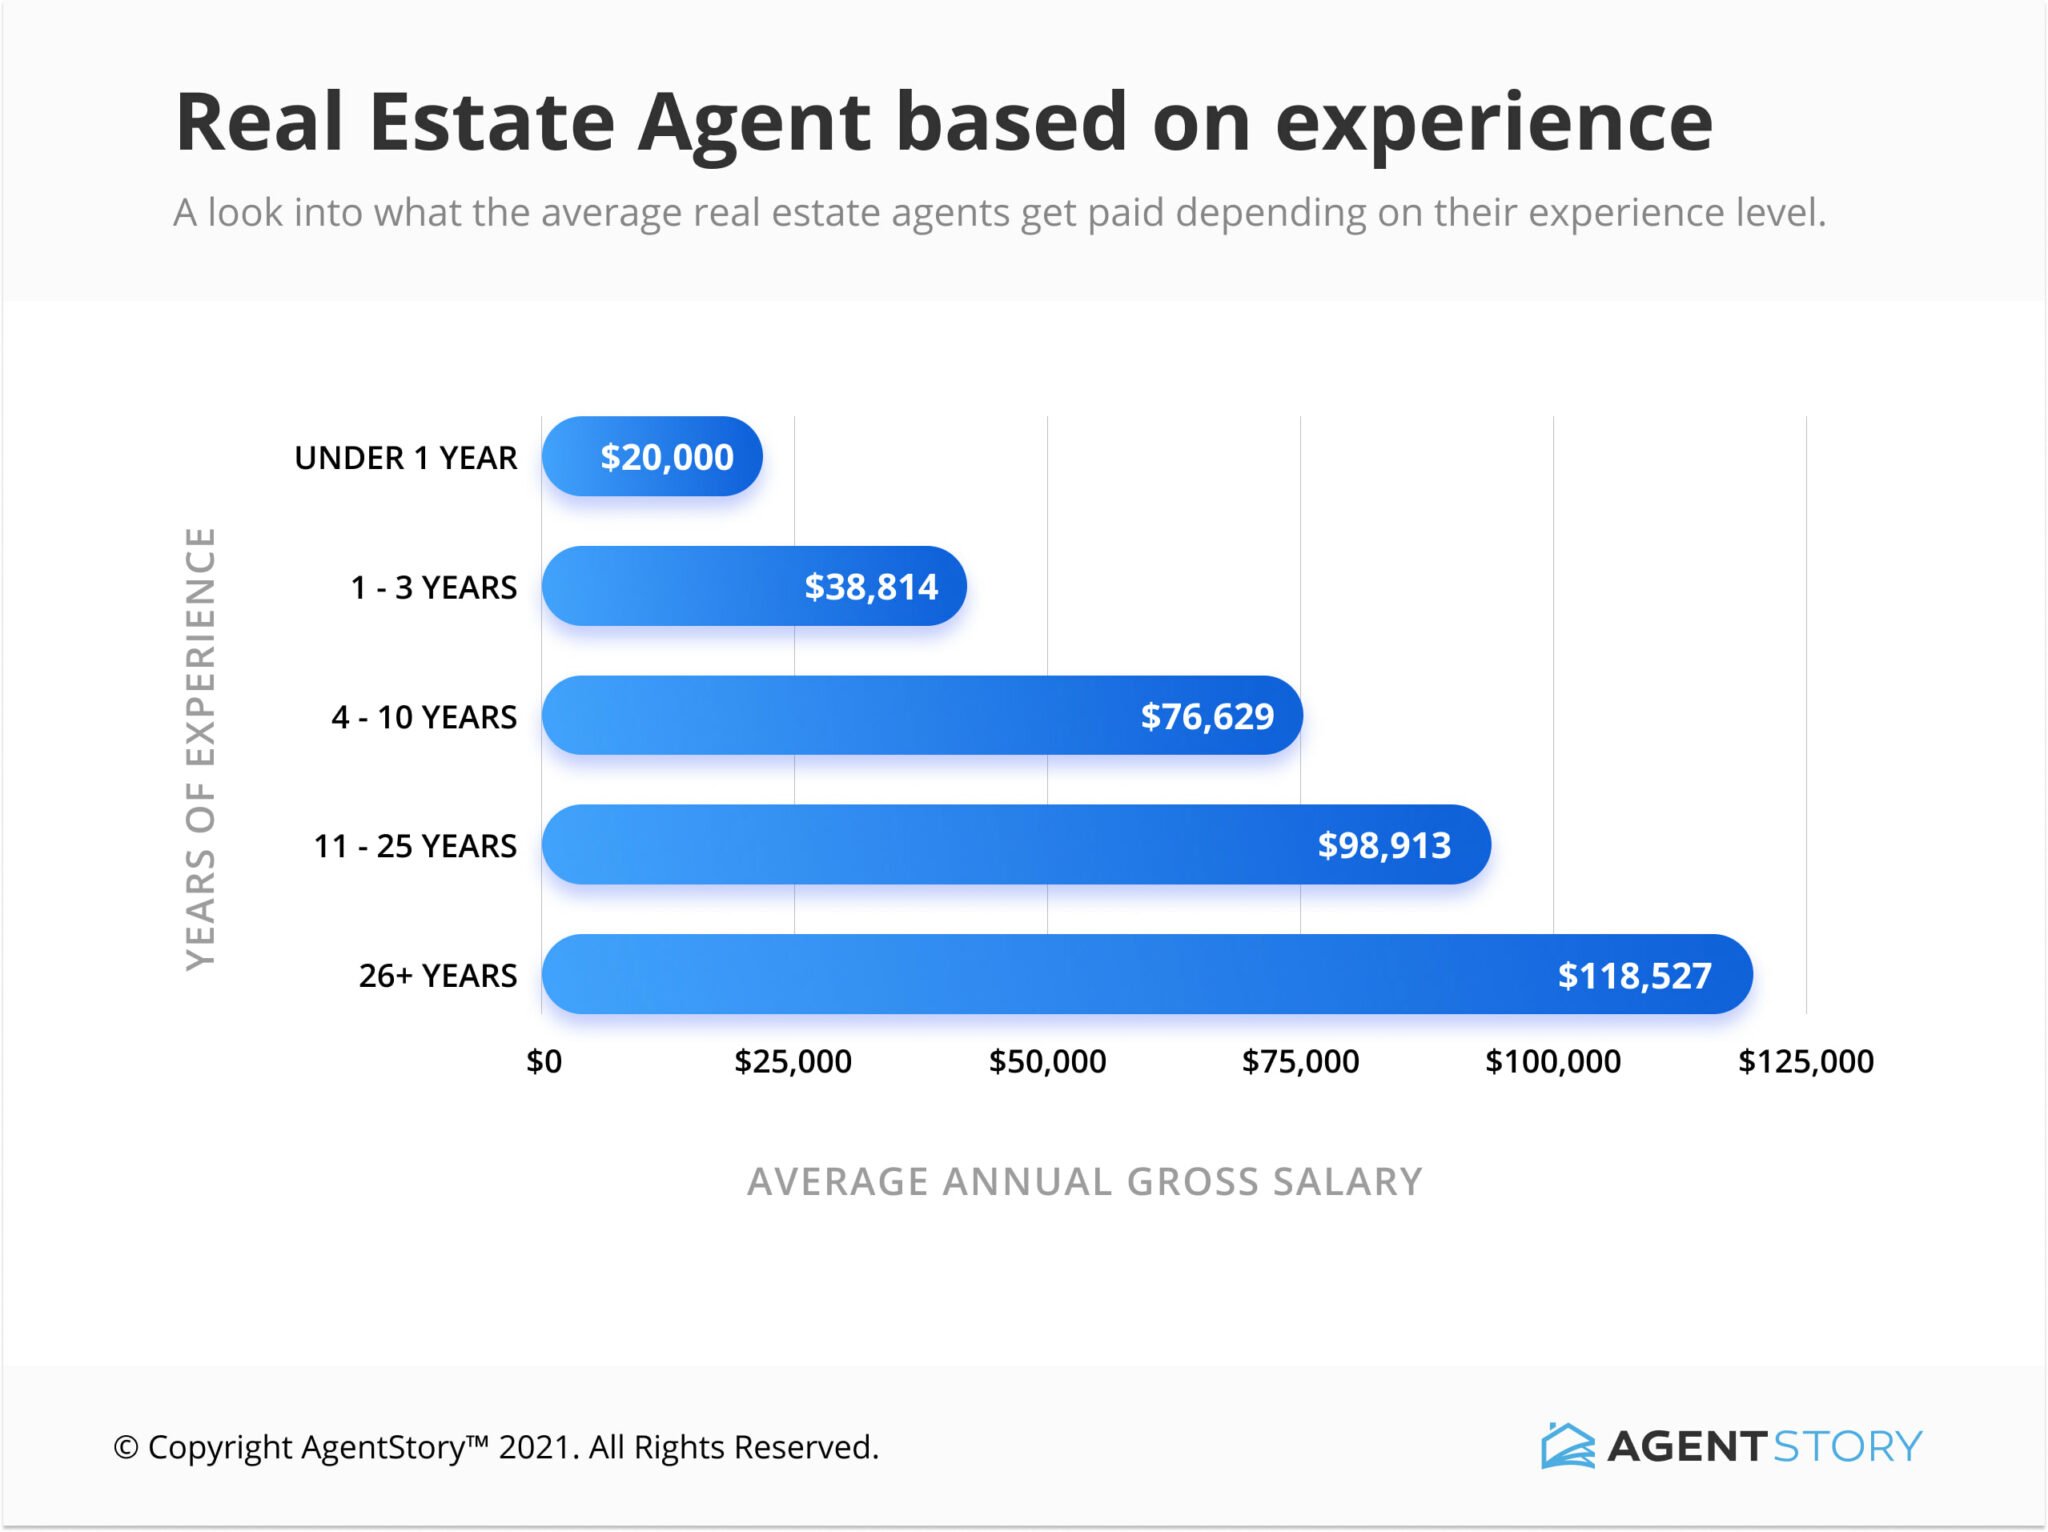 What persentage of money do real estate agents get